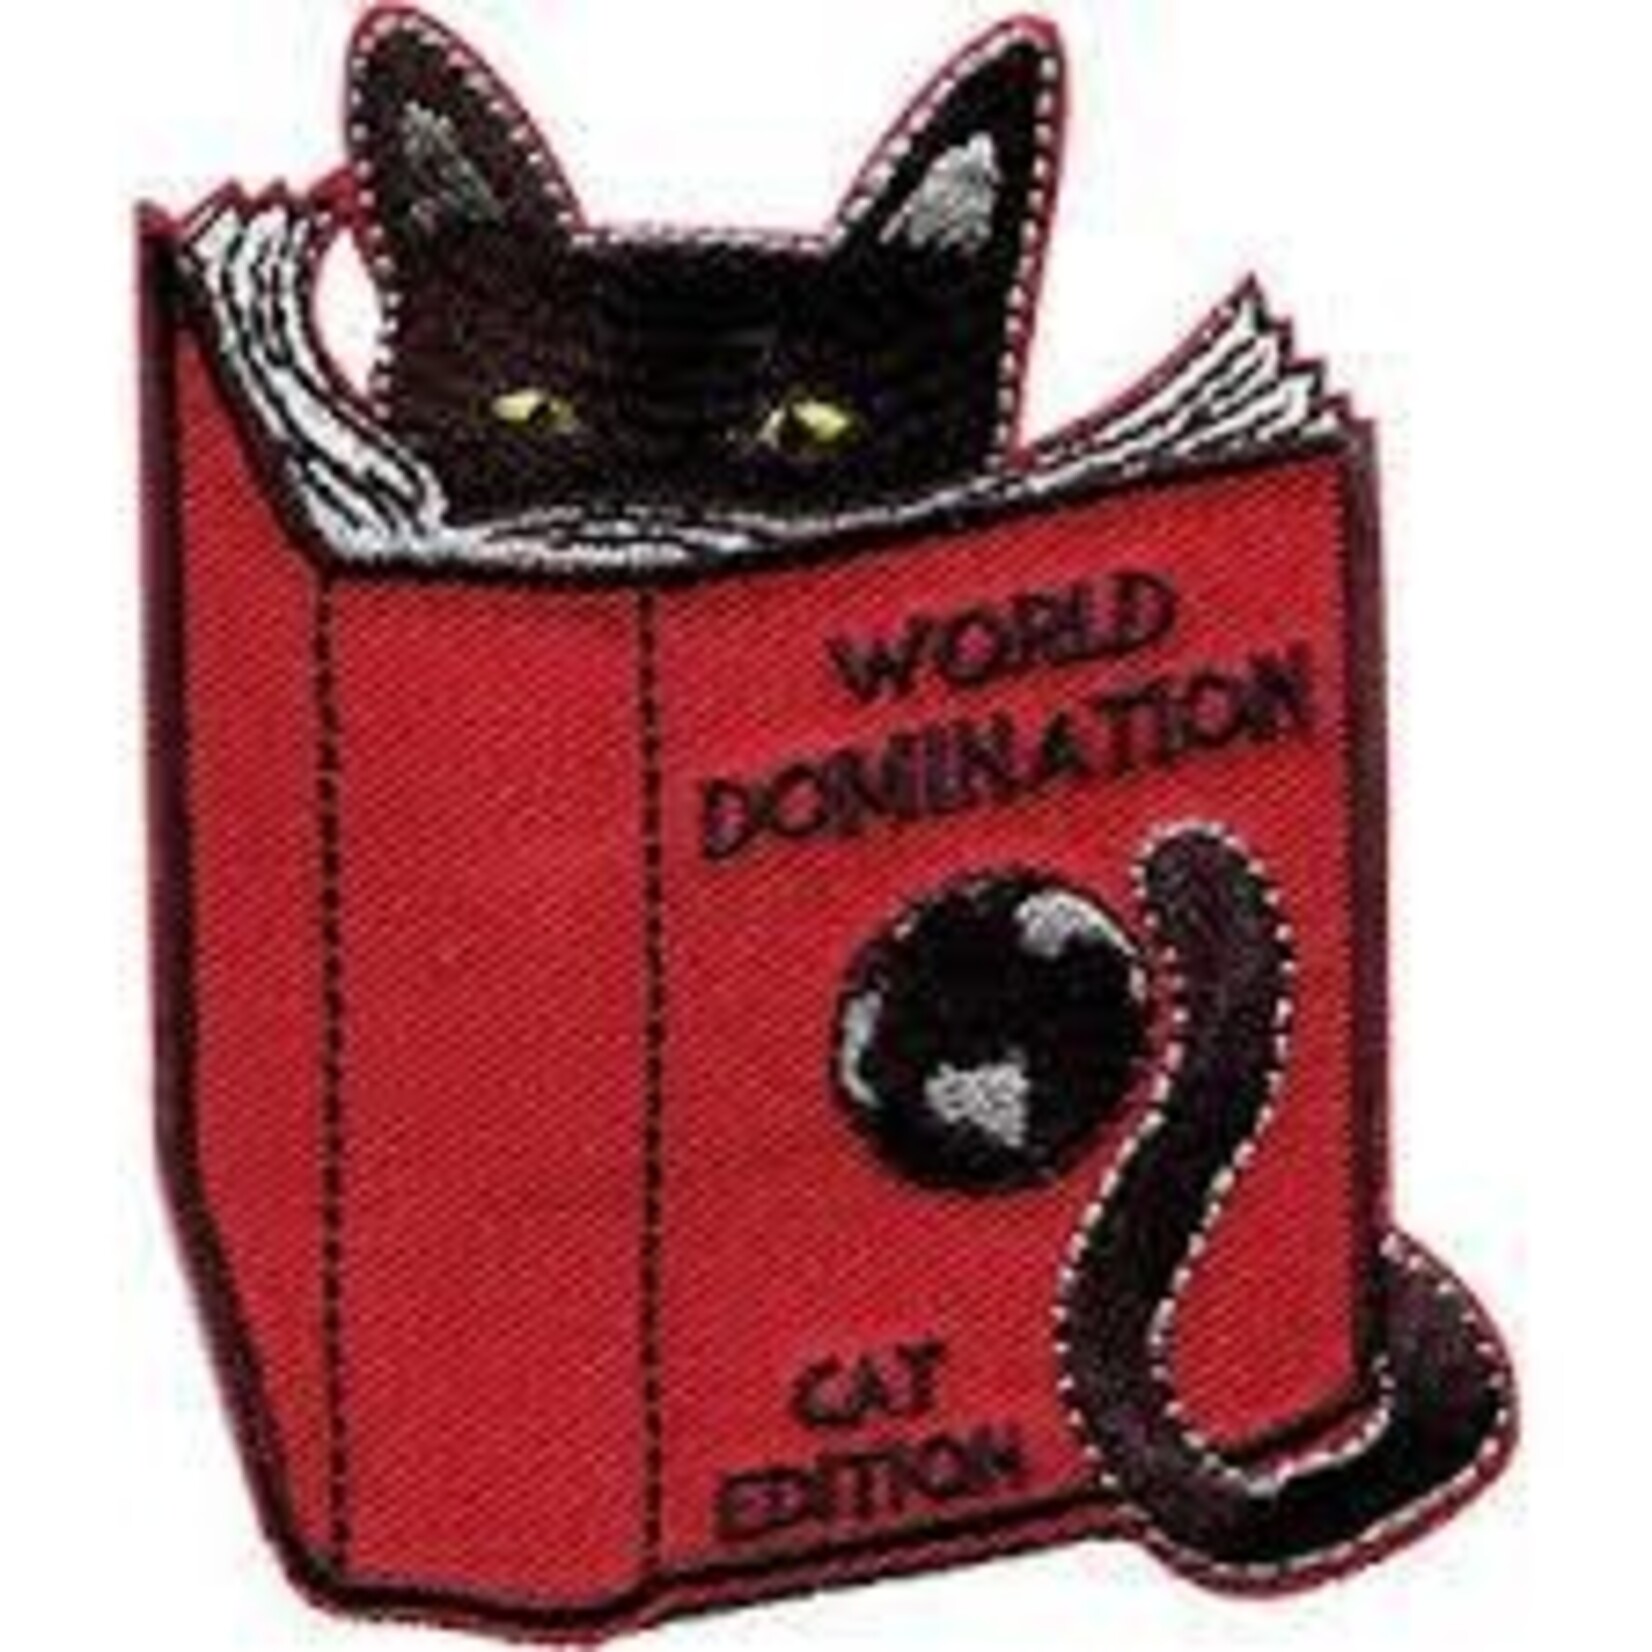 C&D Visionary Inc. World Domination Cat Patch